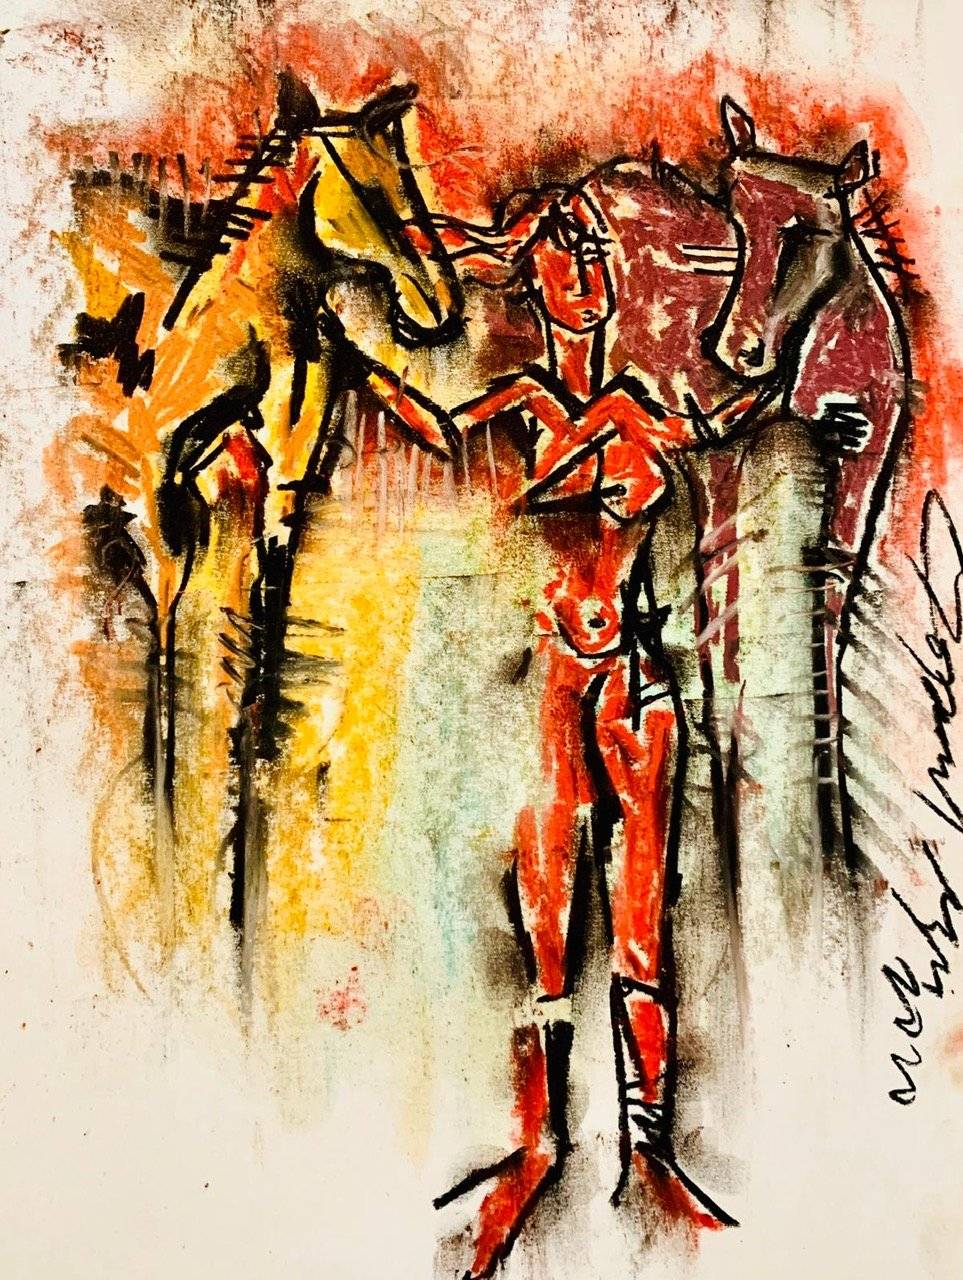 Buy Set Them Free Painting the original Matted Charcoal and Pastel on Paper artwork by Indian-American artist Gopaal Seyn | RedBlueArts.com